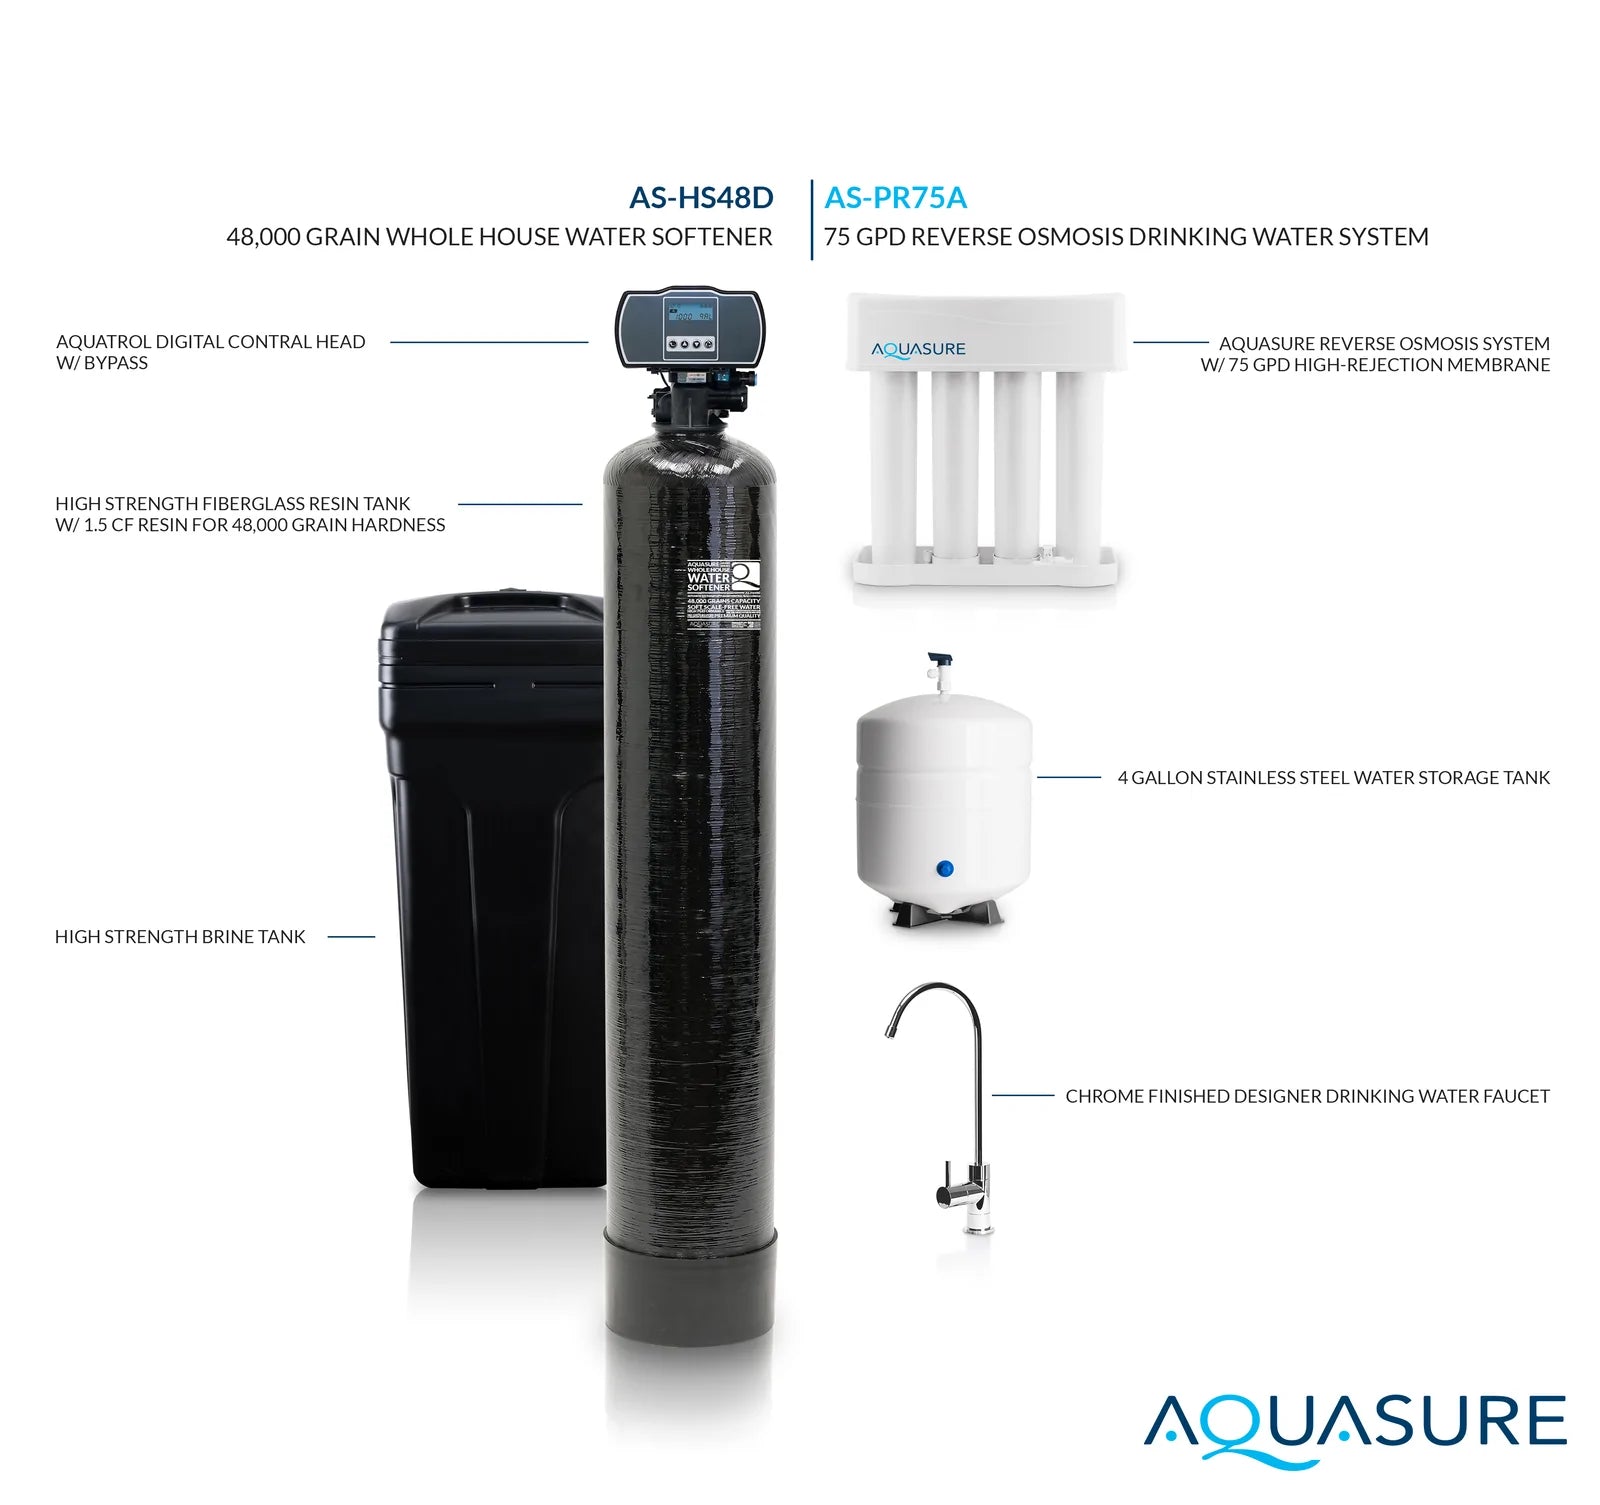 Aquasure, Aquasure AS-PR75HS48D 48,000 Grain Whole House Water Softener and Reverse Osmosis Drinking Water Filter Bundle New